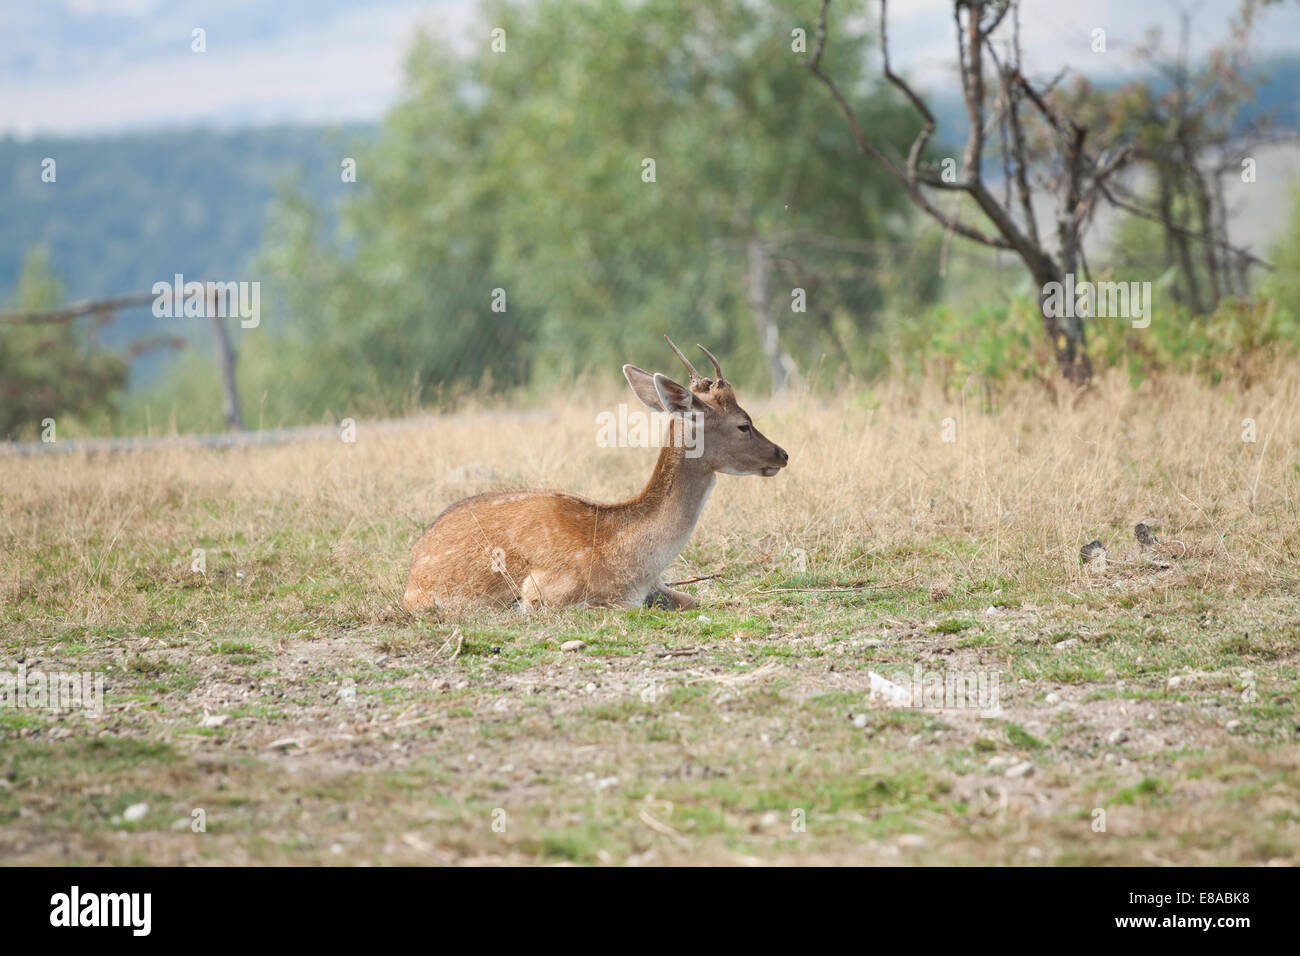 Spotted Deer / Chital (Axis axis)  sitting on the field Stock Photo